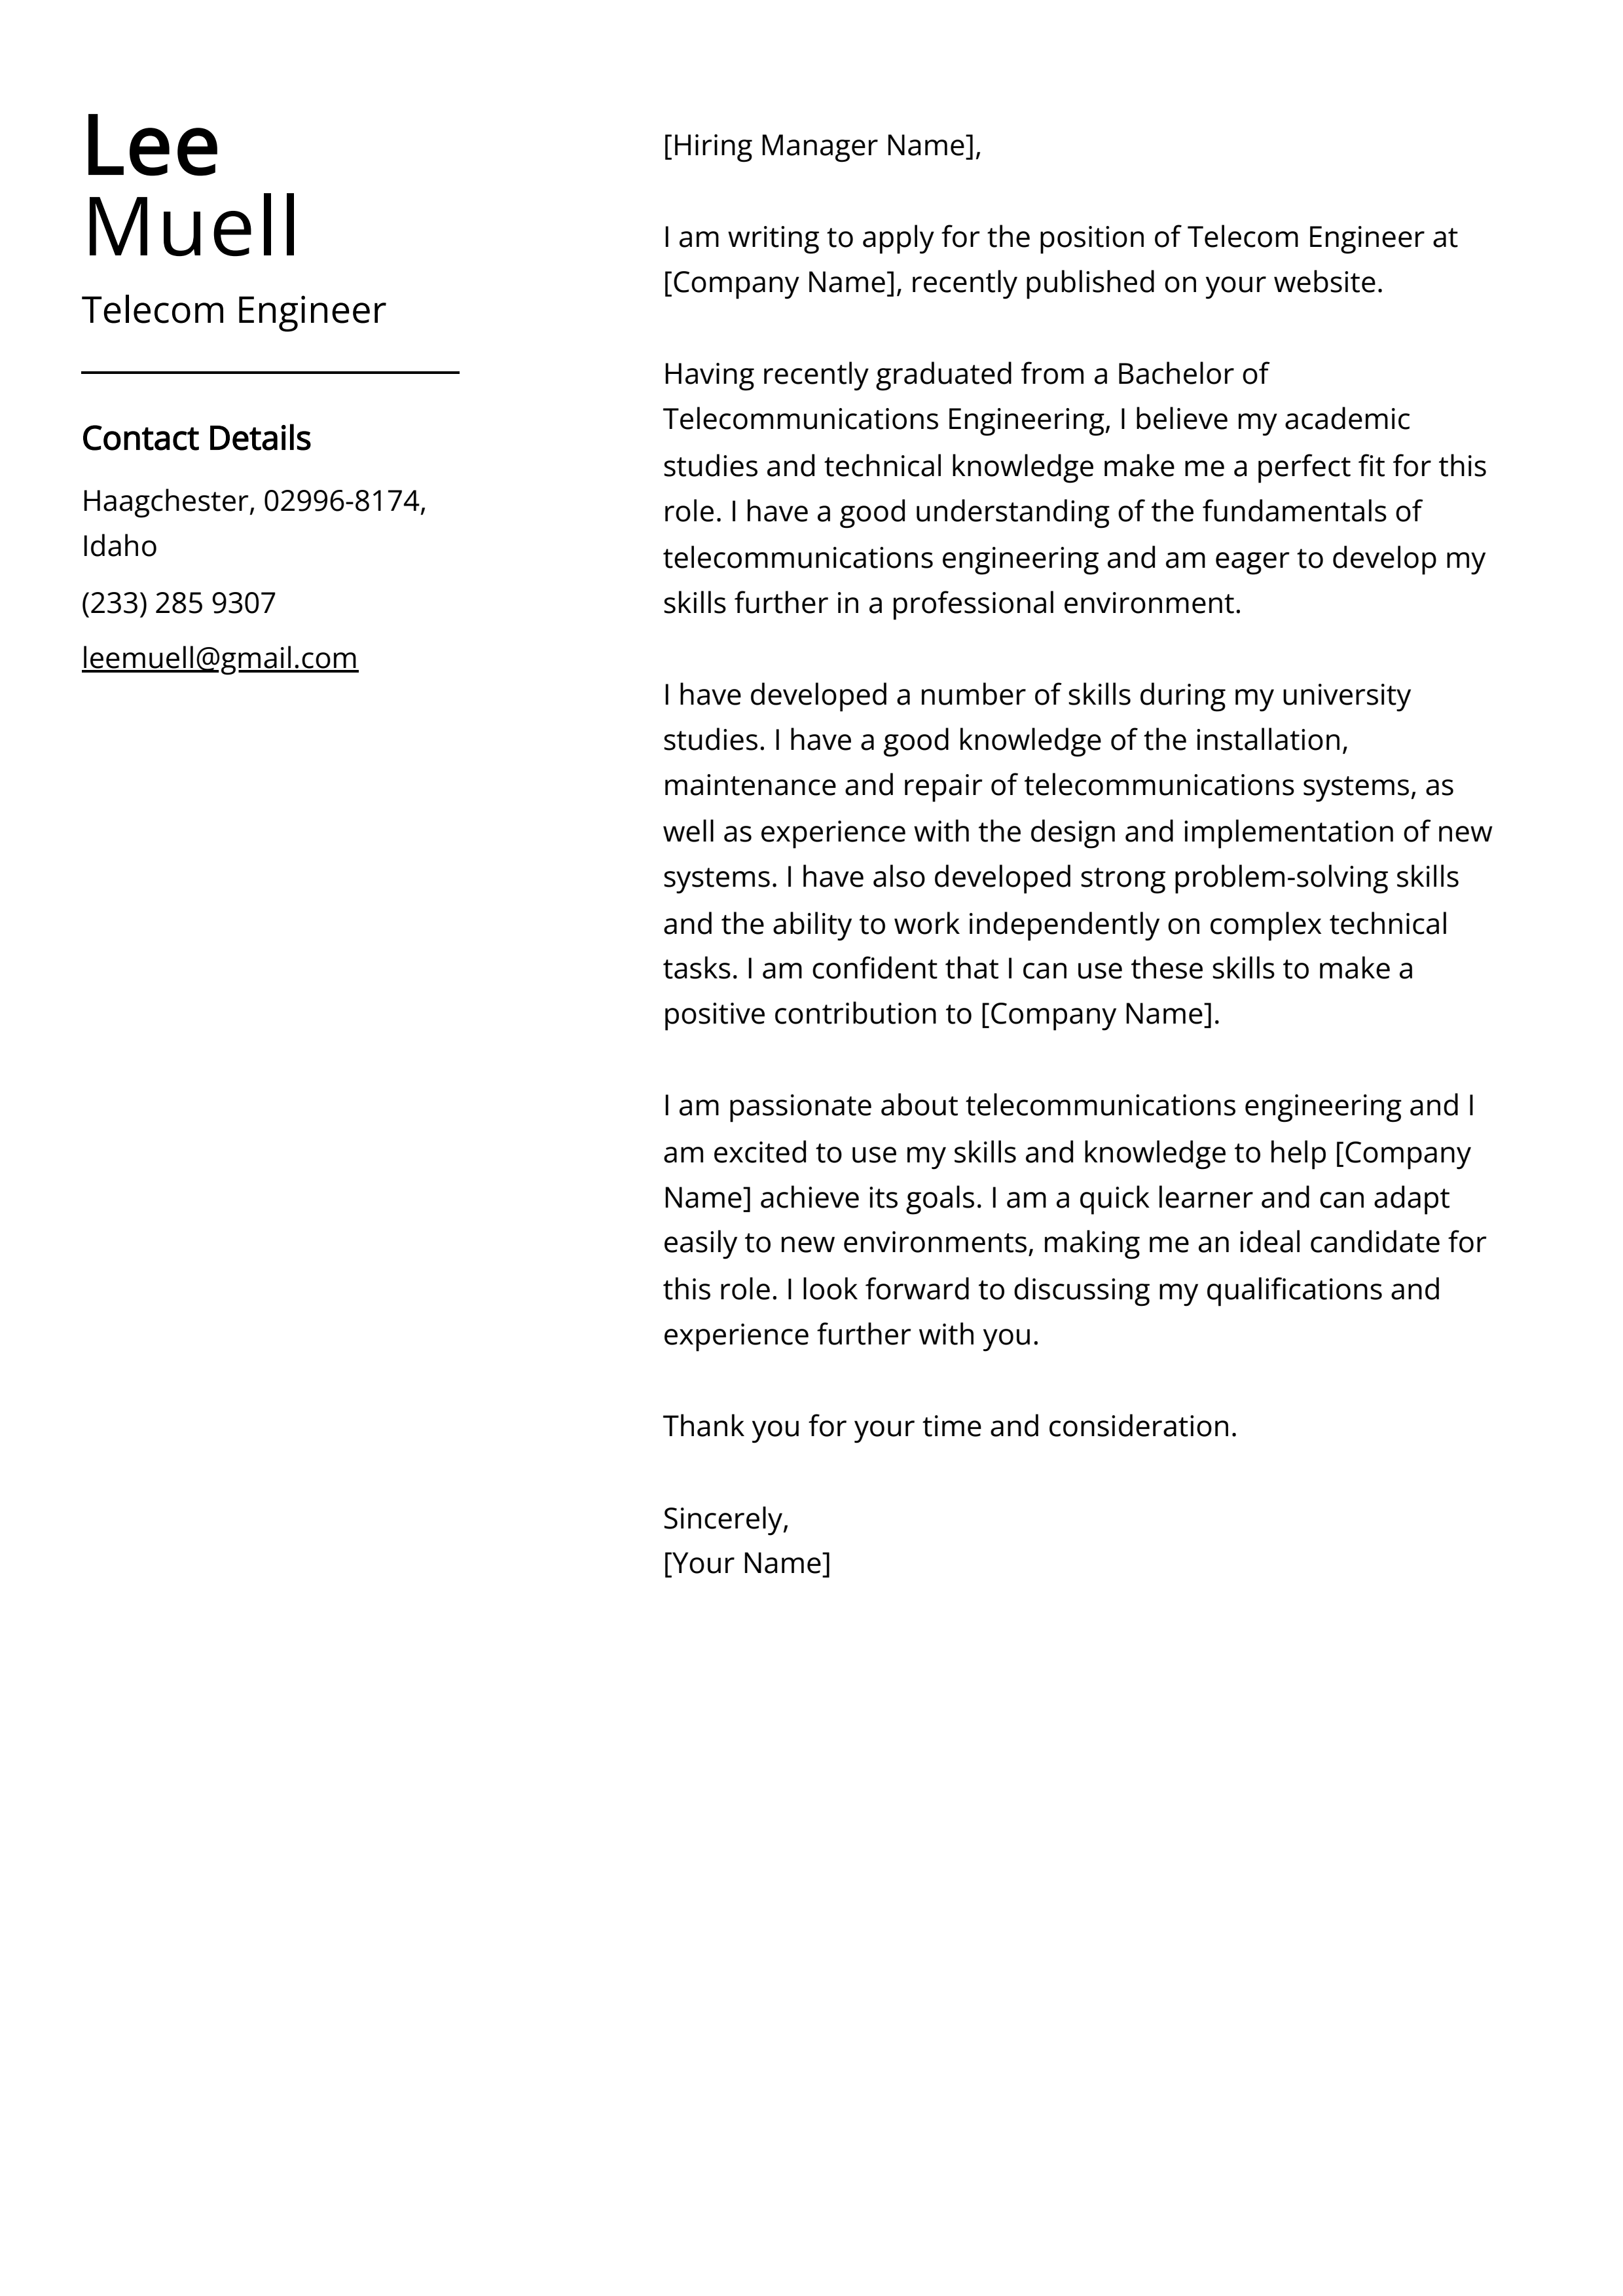 Telecom Engineer Cover Letter Example